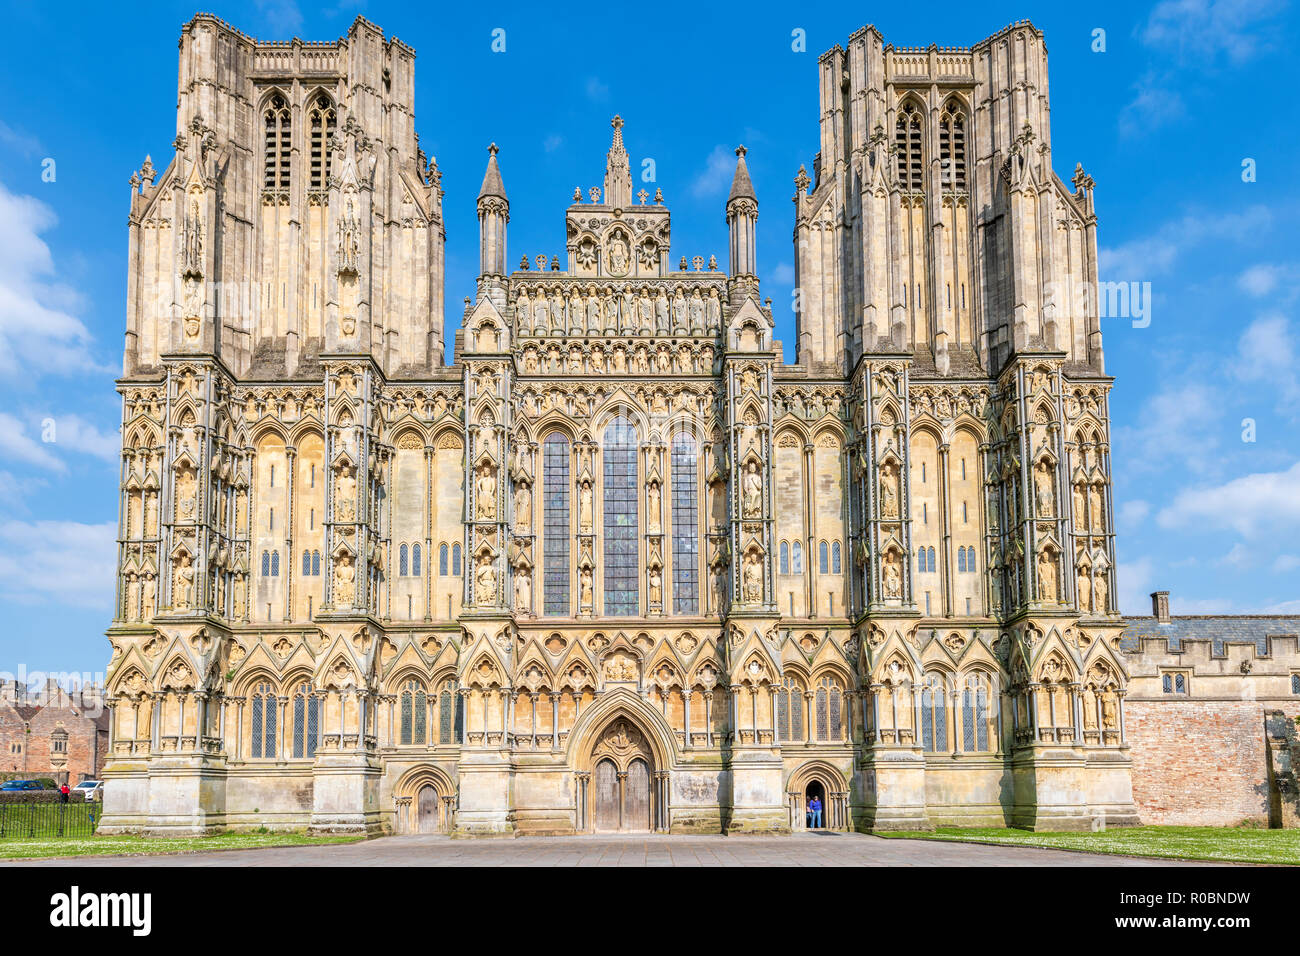 The impressive Wells Cathedral is bathed in May sunshine. Stock Photo